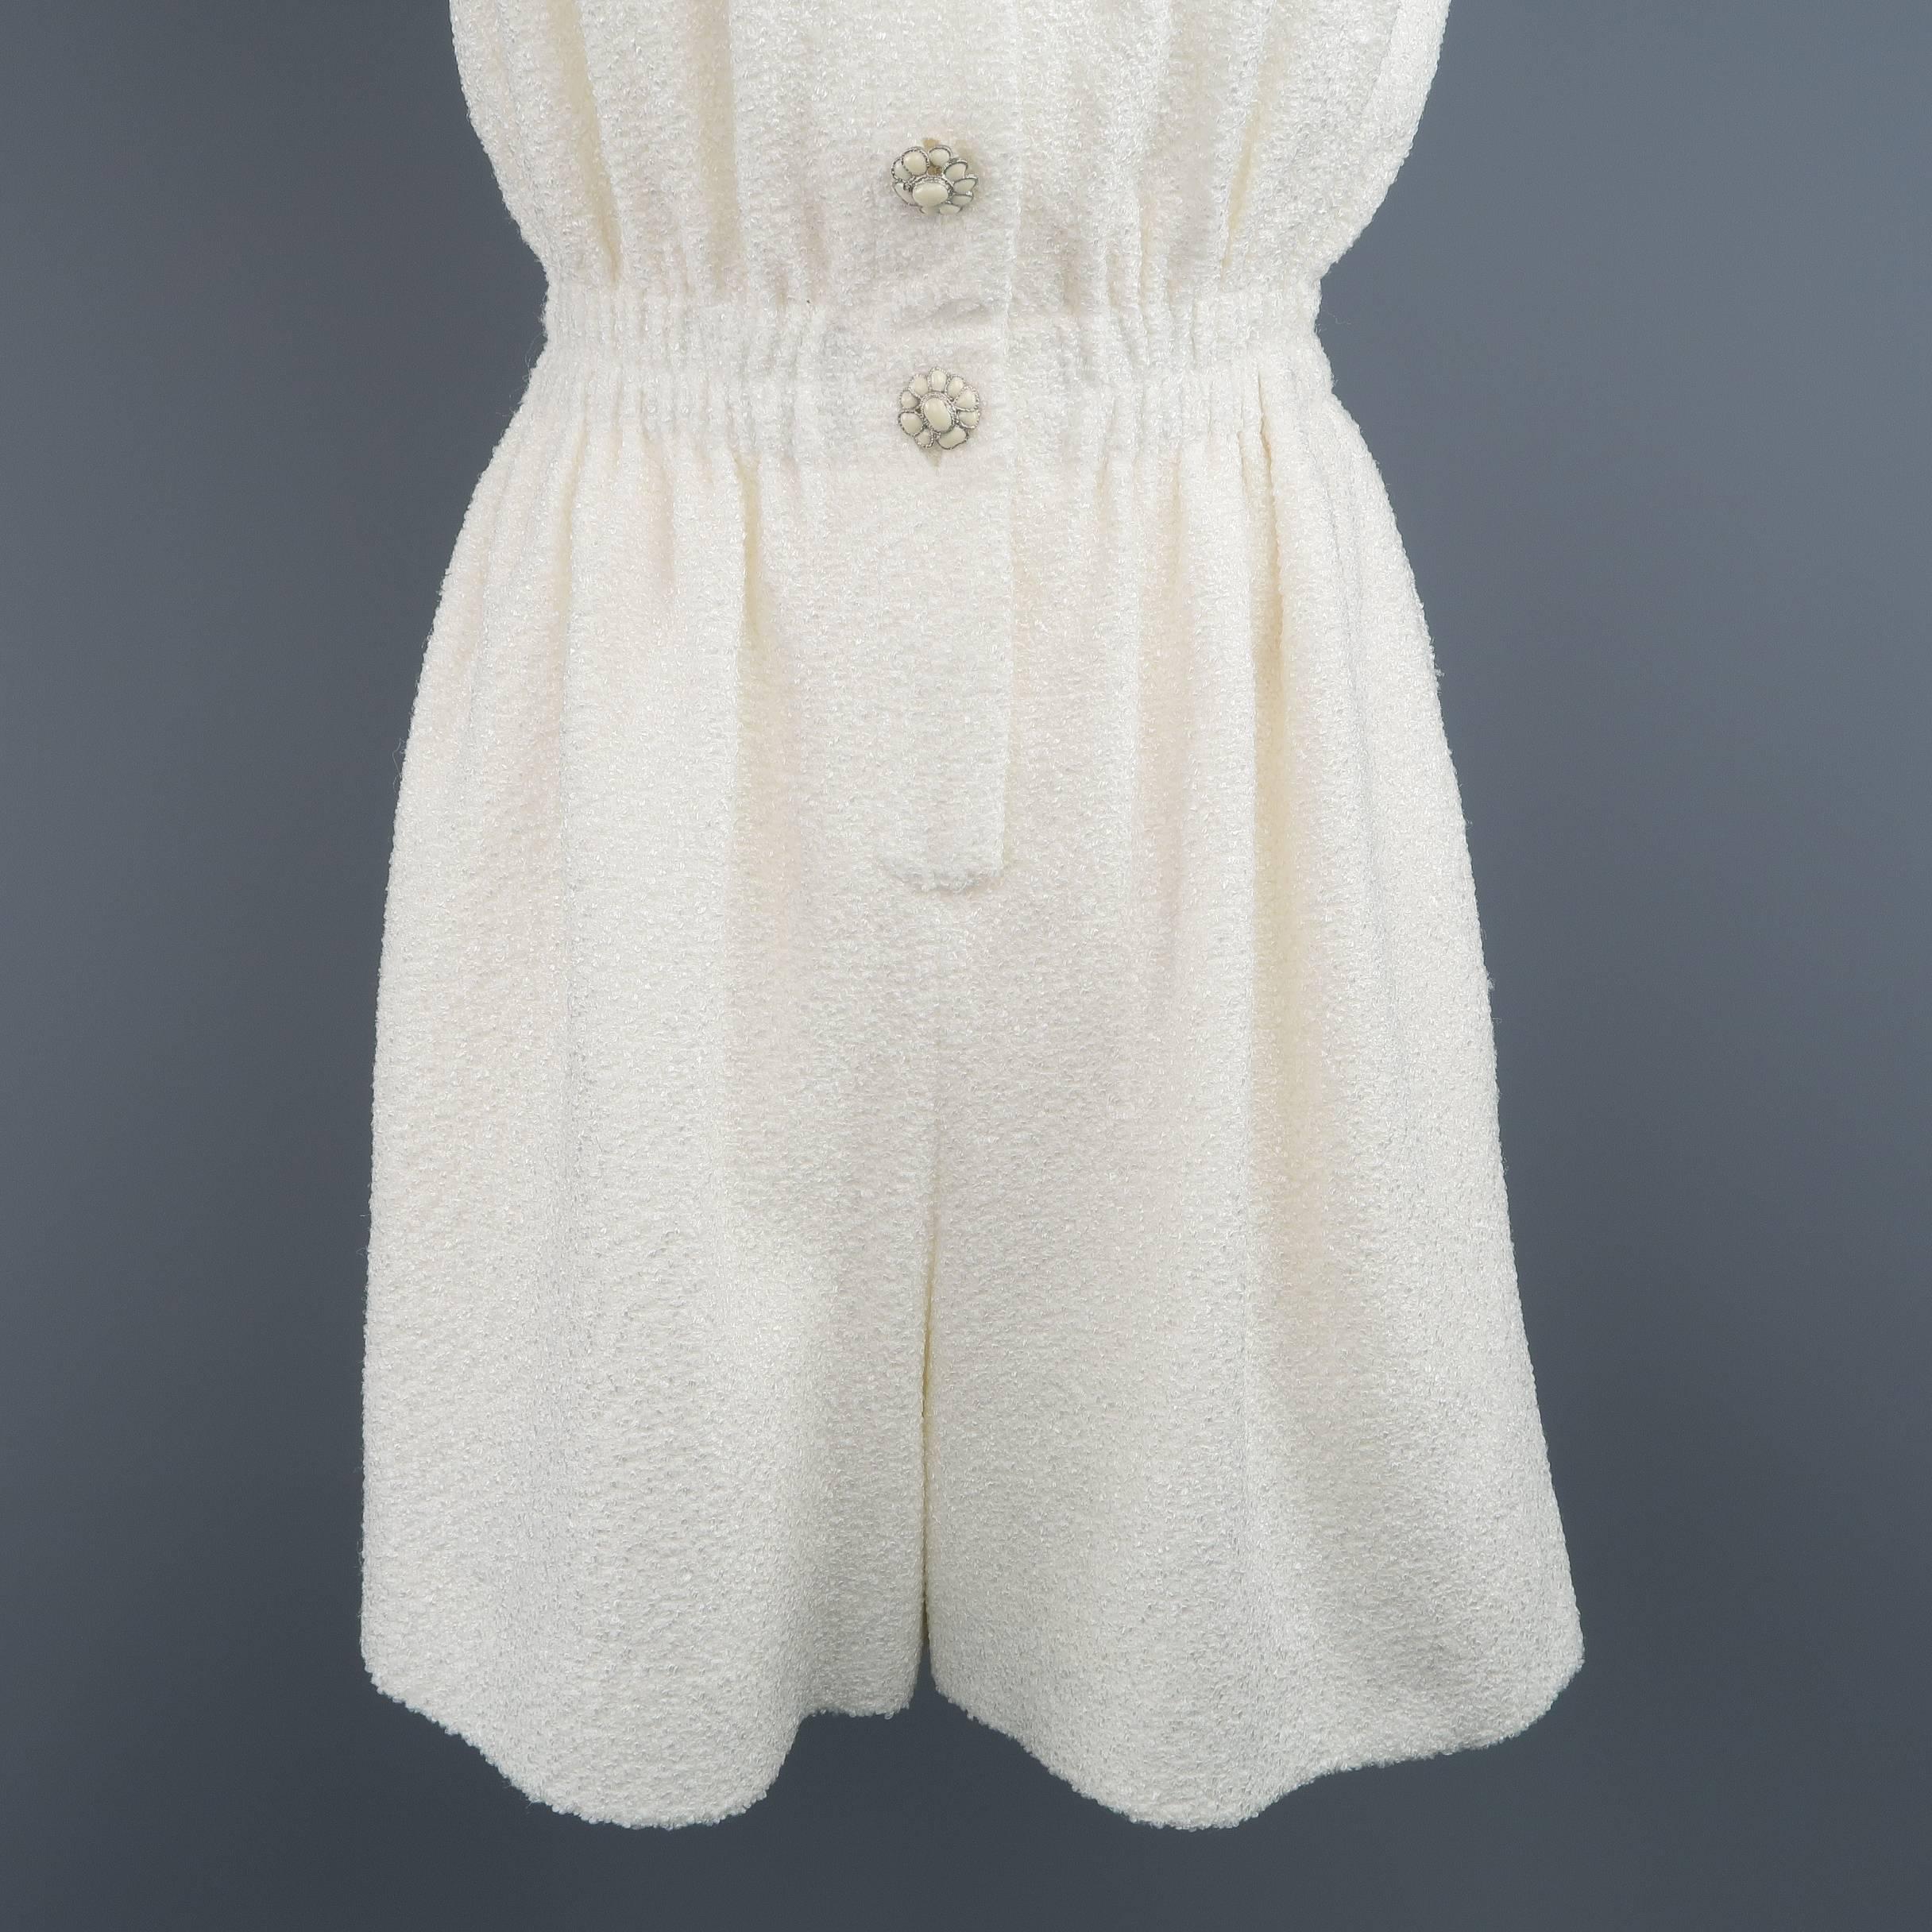 This gorgeous CHANEL romper comes in a creamy white textured fabric and features a round neckline, pleated bust, gathered waistband, and cream enamel flower buttons. Made in France.
 
Excellent Pre-Owned Condition.
Marked: EU 34
 
Measurements:
